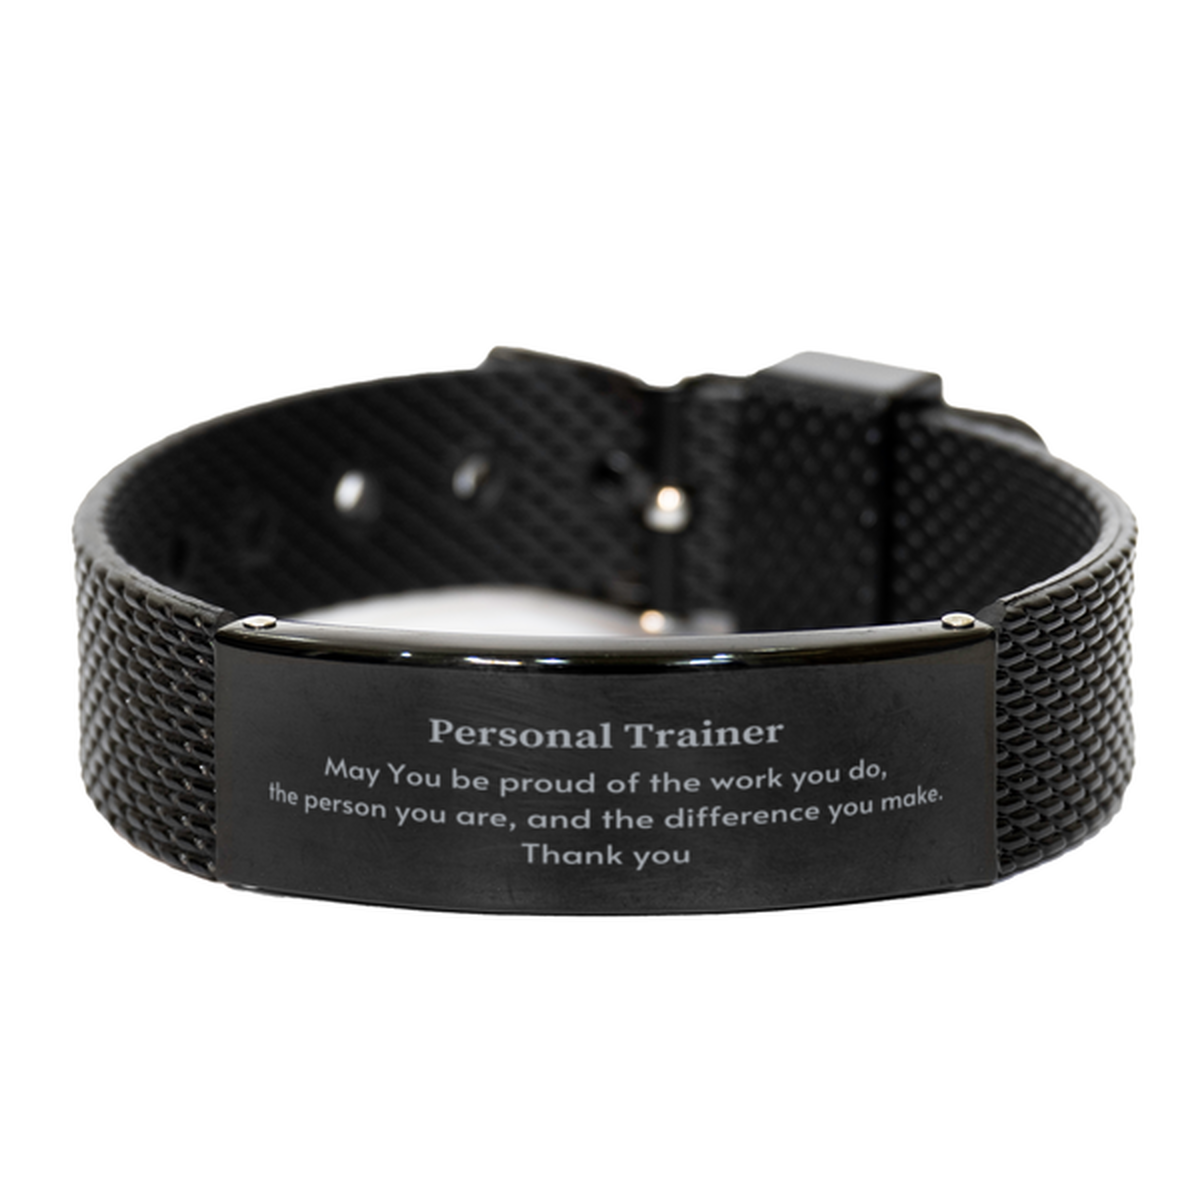 Heartwarming Black Shark Mesh Bracelet Retirement Coworkers Gifts for Personal Trainer, Personal Trainer May You be proud of the work you do, the person you are Gifts for Boss Men Women Friends